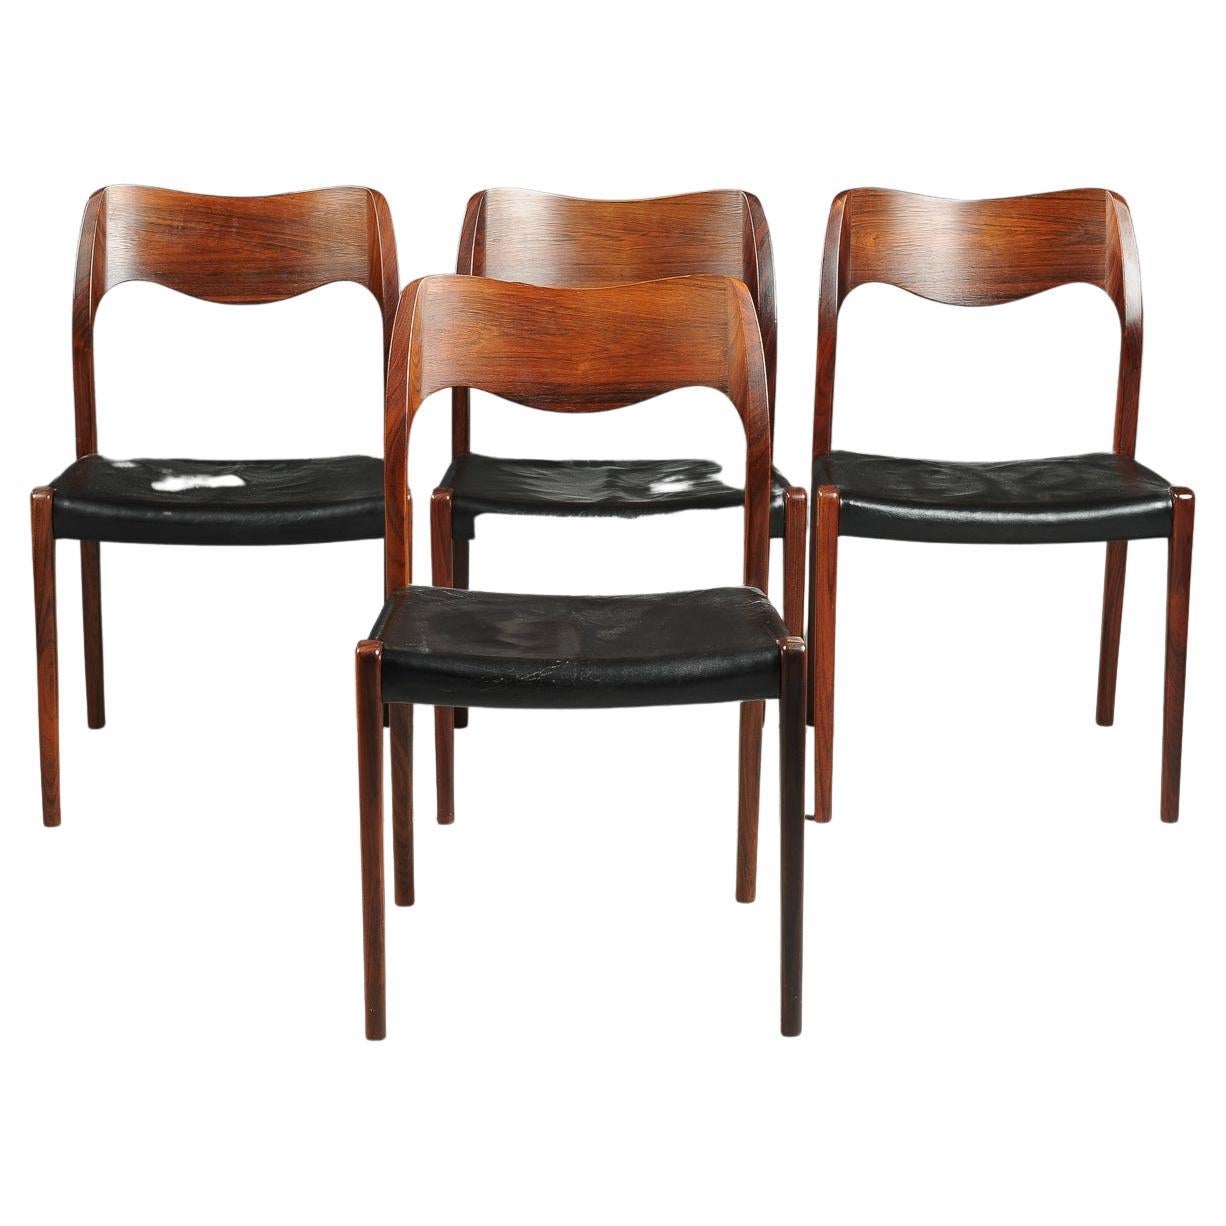 Pictured is a set of four dining chairs designed by Niels Otto Moller in 1951 and made by JL Moller before 1969, as indicated by the round disc label. This listing includes the table pictured. 

Original black leather is in fair condition showing